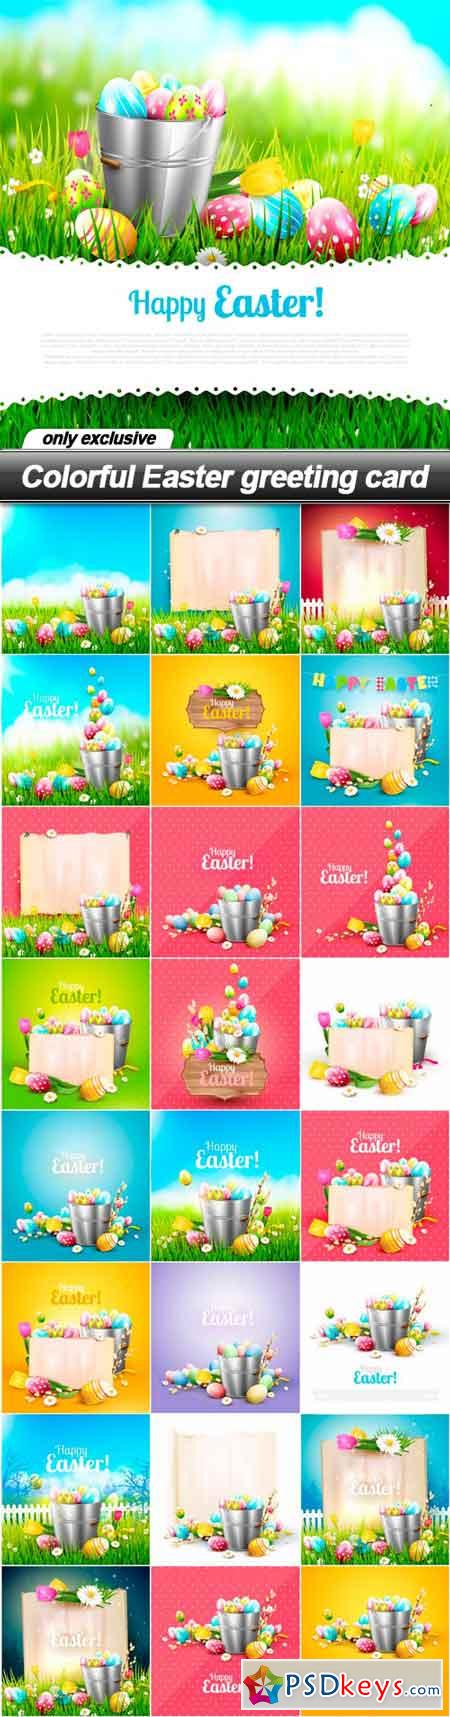 Colorful Easter greeting card - 25 EPS